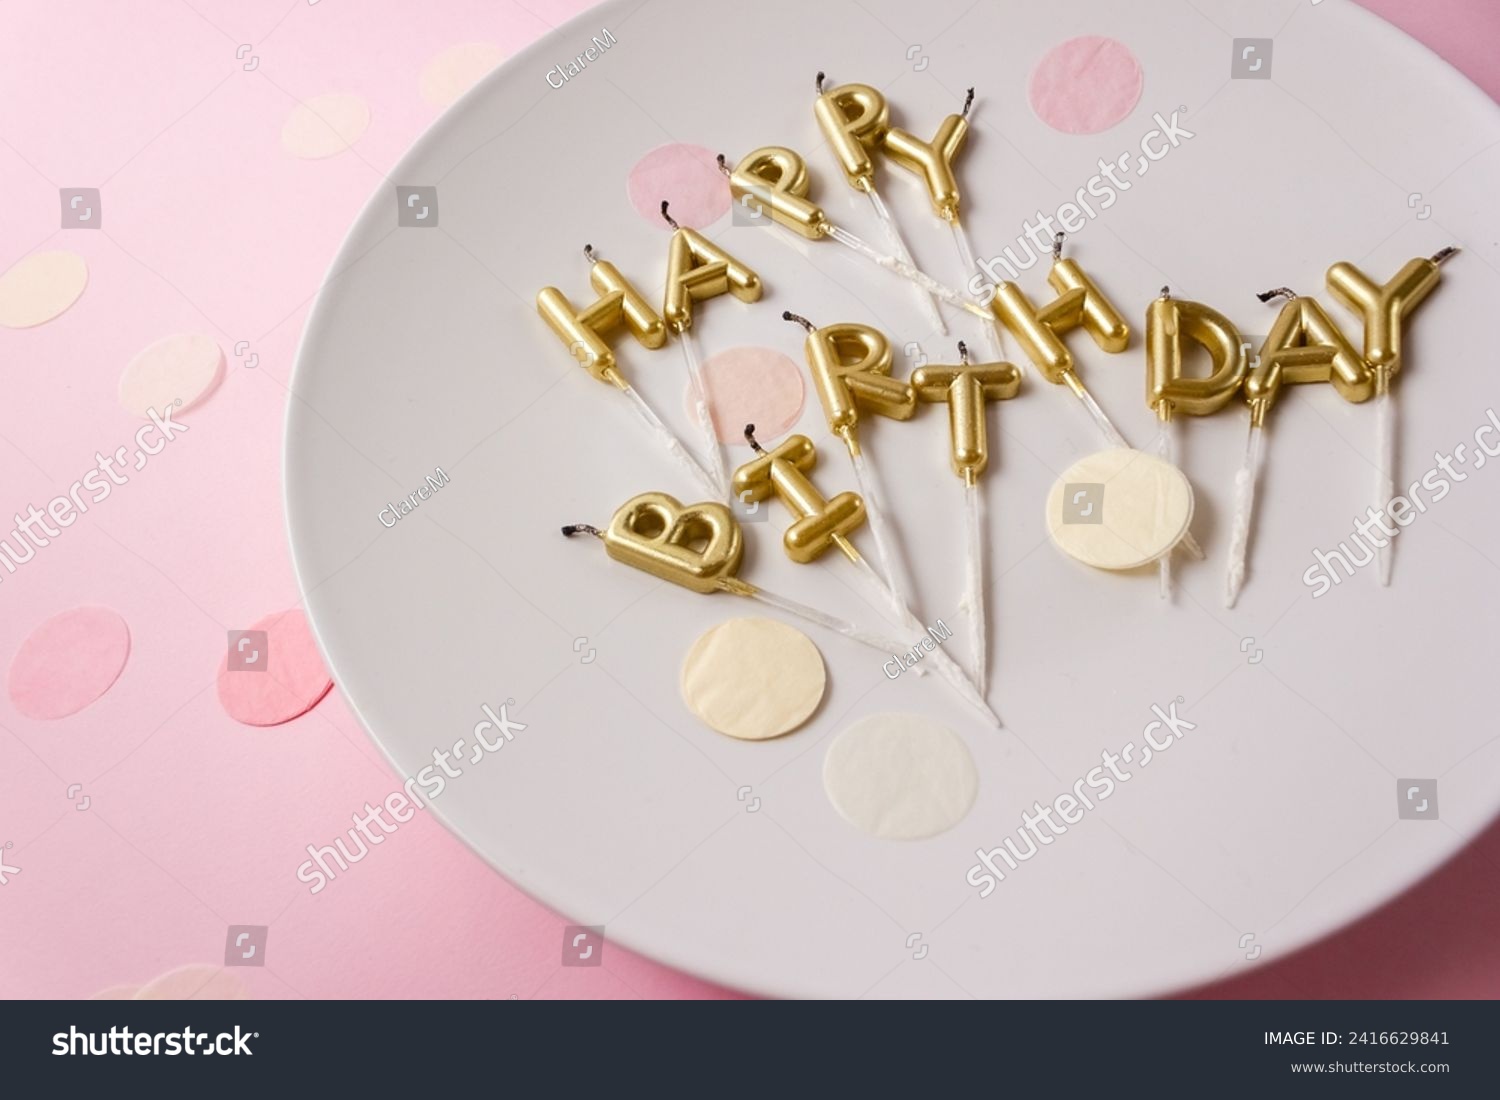 Used Happy Birthday candle letters on a party plate surrounded by confetti. Selective focus #2416629841